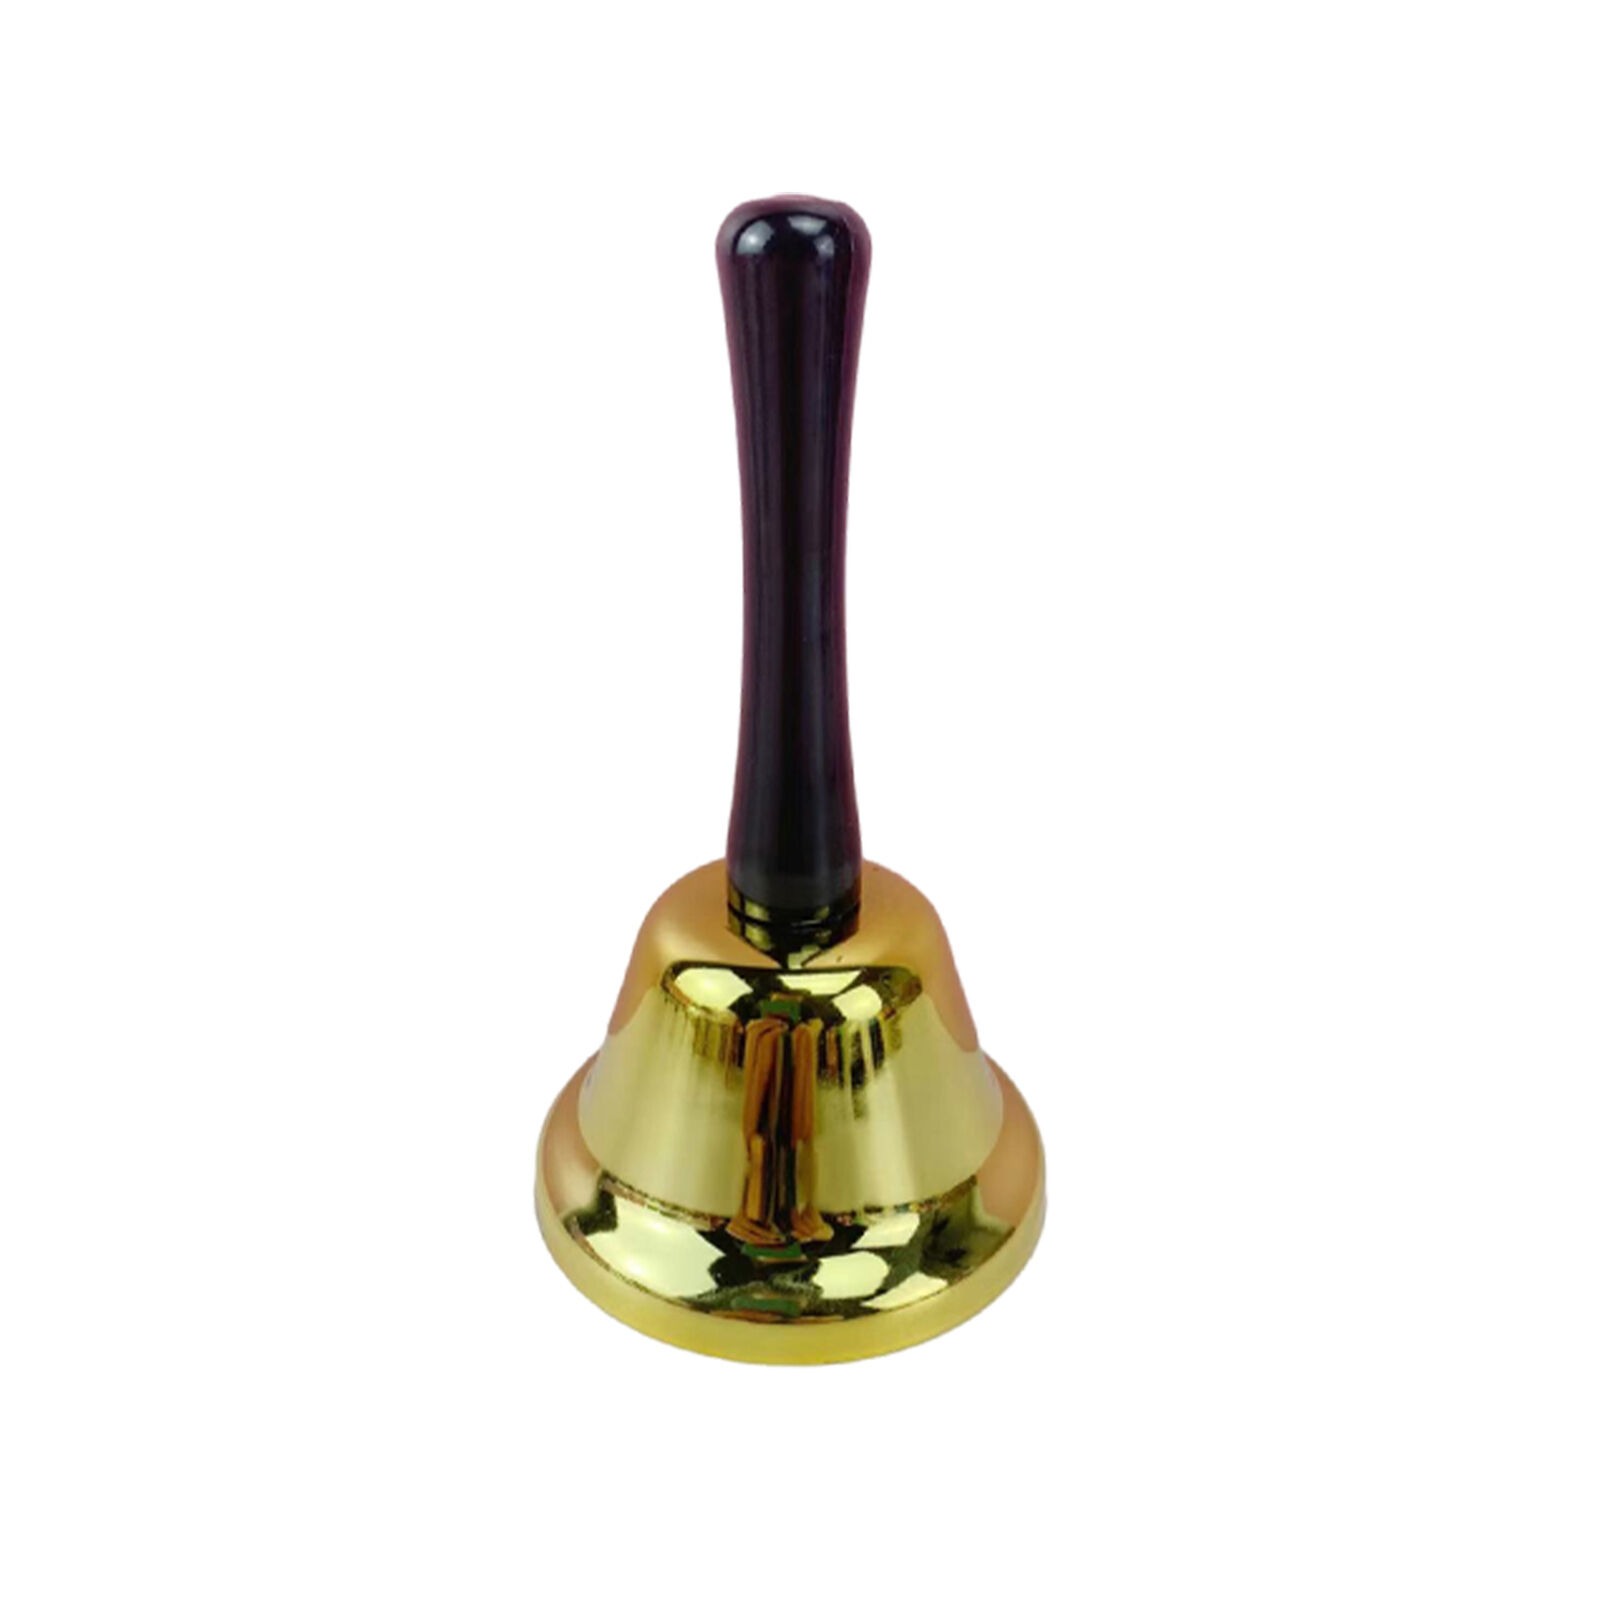 Hand Bell with Handle Elegant Super Loud Metal Hand Bell Service Bell